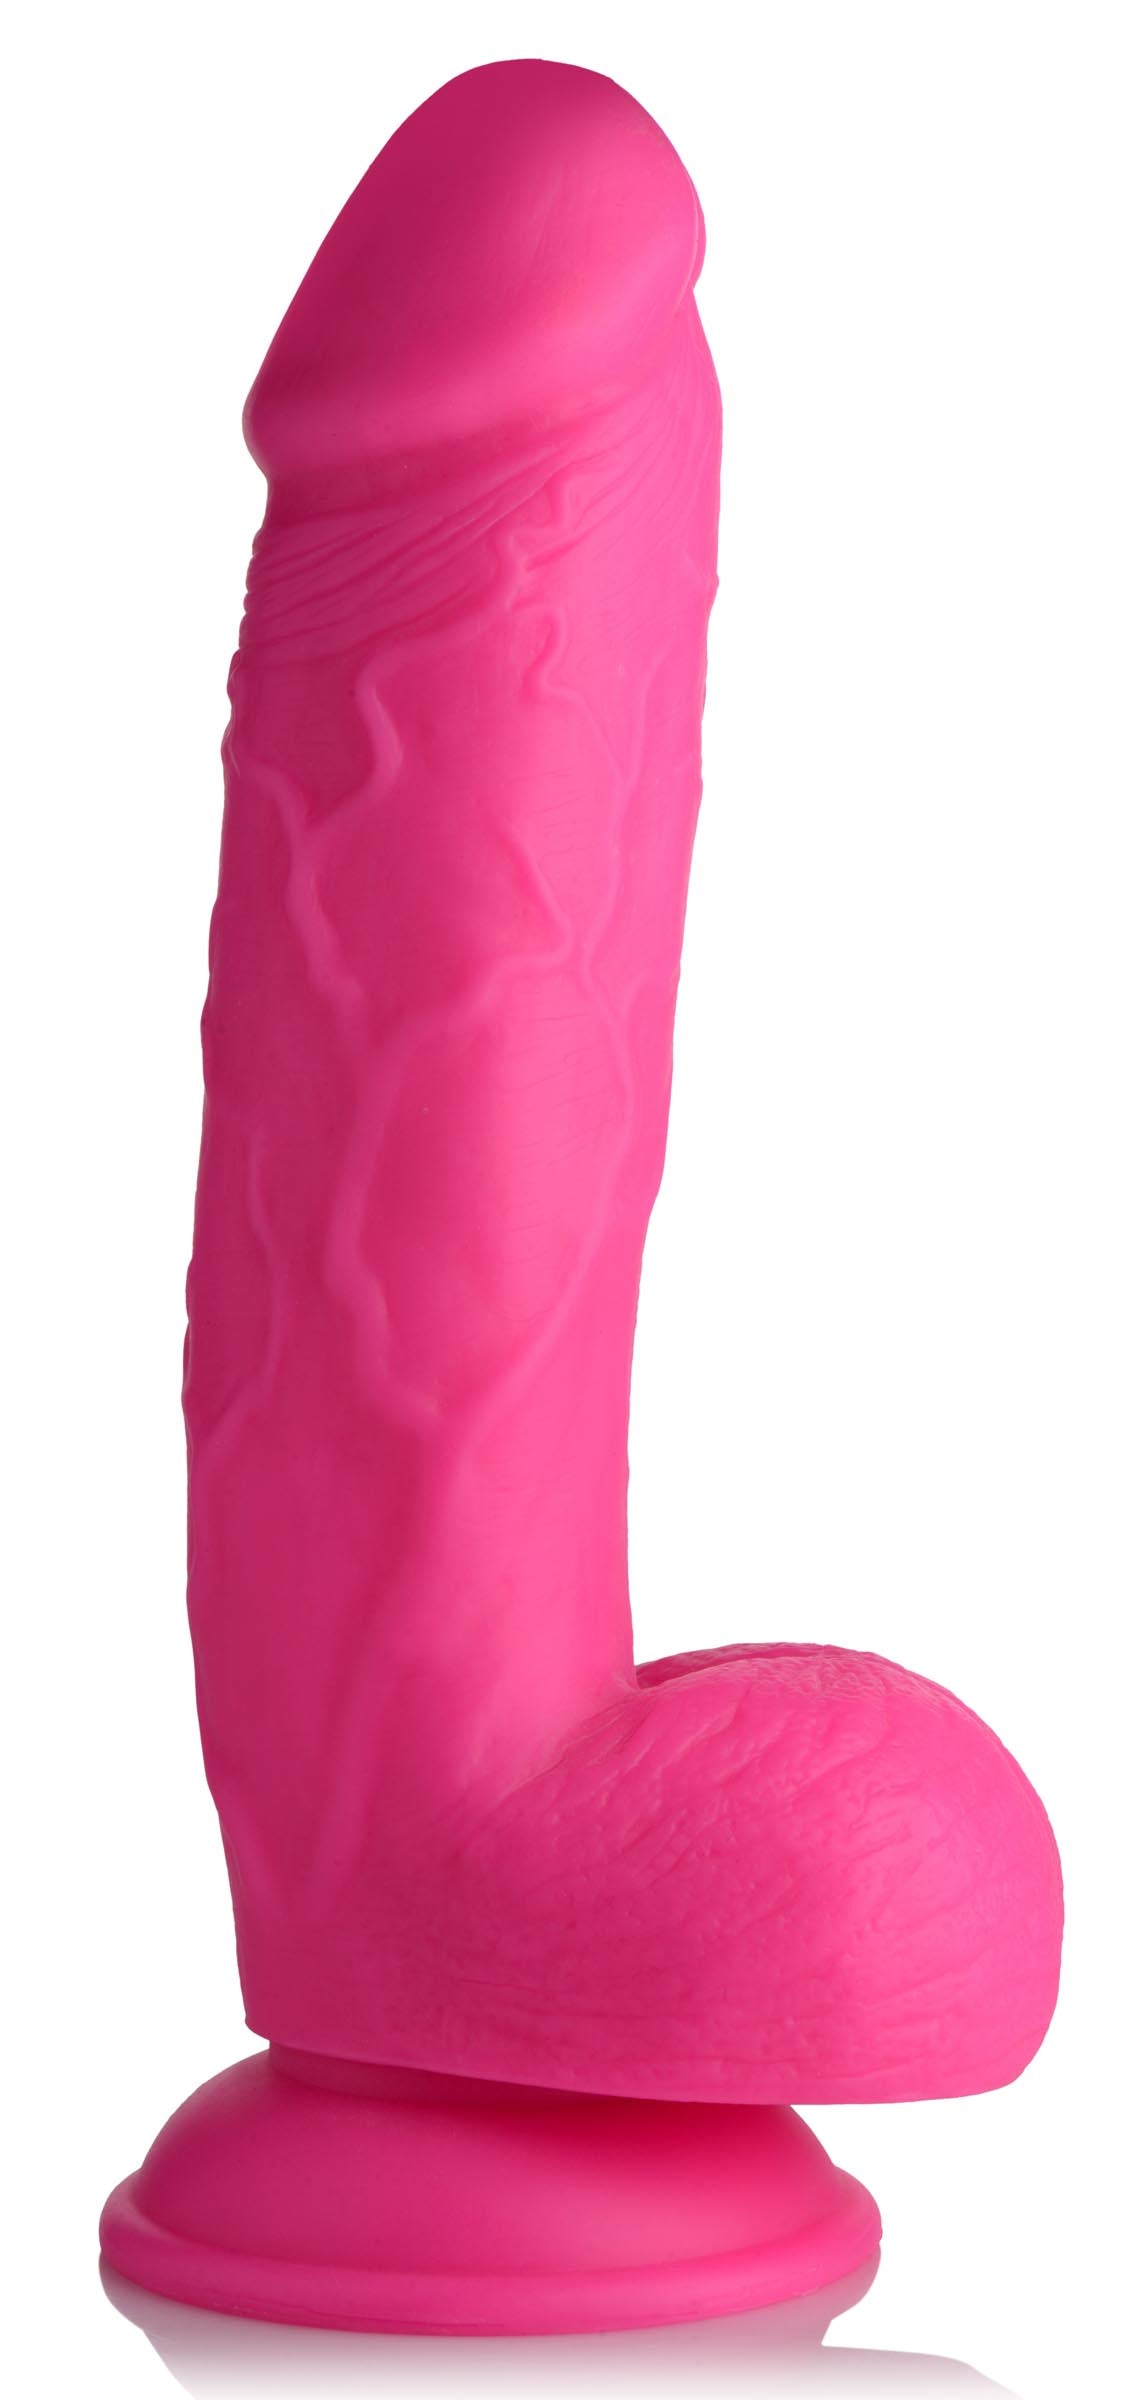 8.25 Inch Dildo With Balls - Pink